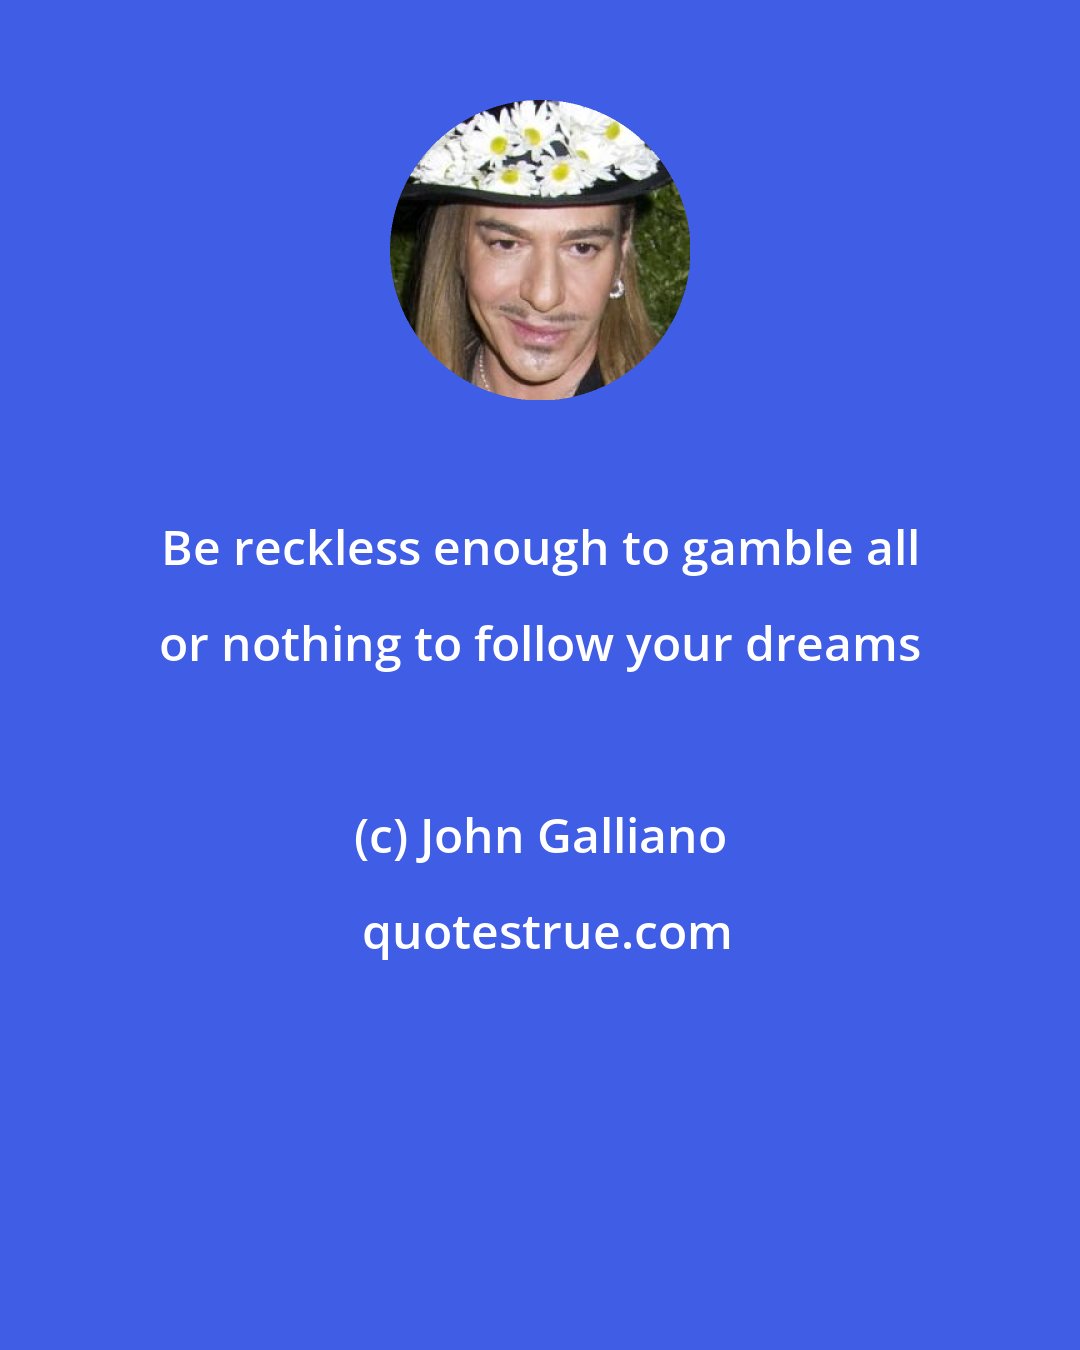 John Galliano: Be reckless enough to gamble all or nothing to follow your dreams